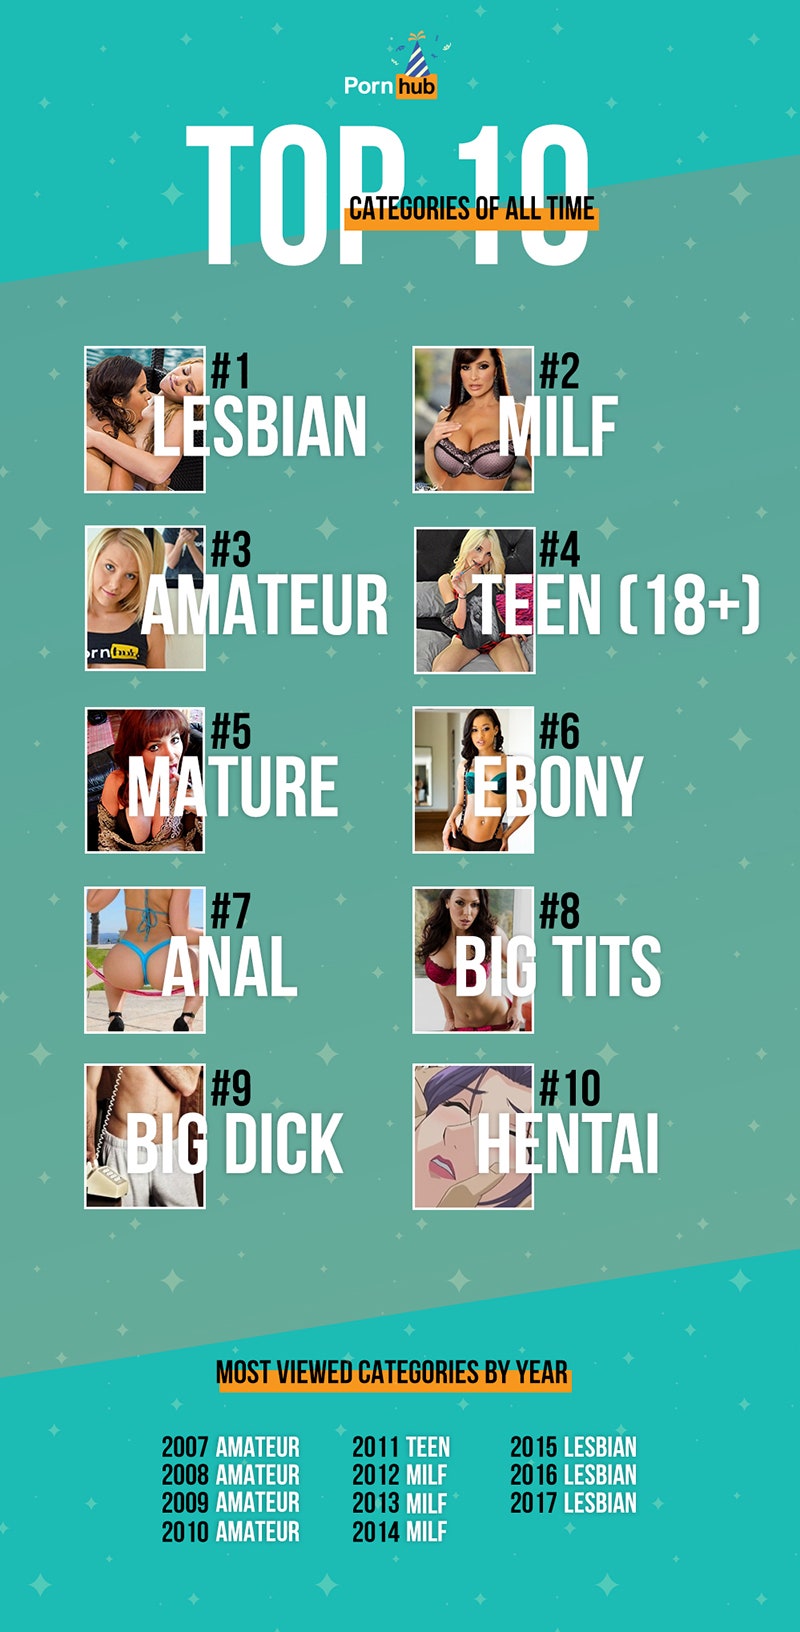 danielle chylinski recommends porn hub categories pic